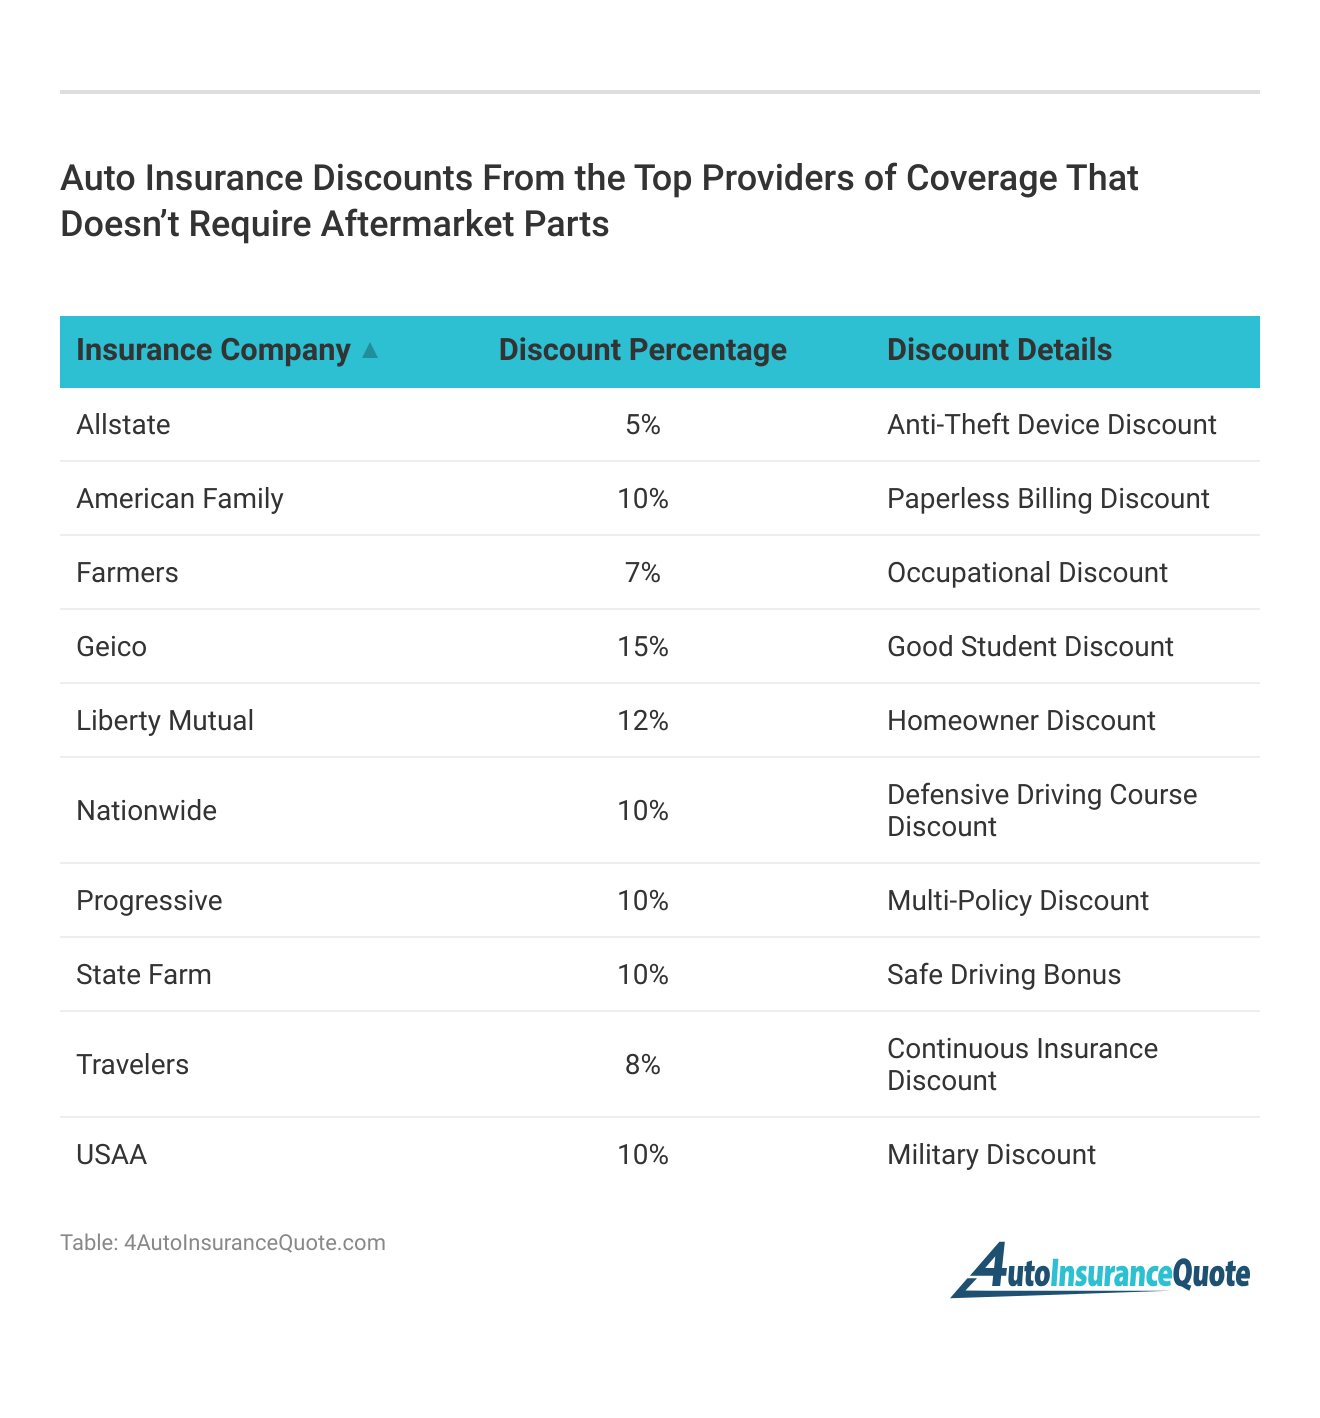 <h3>Auto Insurance Discounts From the Top Providers of Coverage That Doesn’t Require Aftermarket Parts</h3>